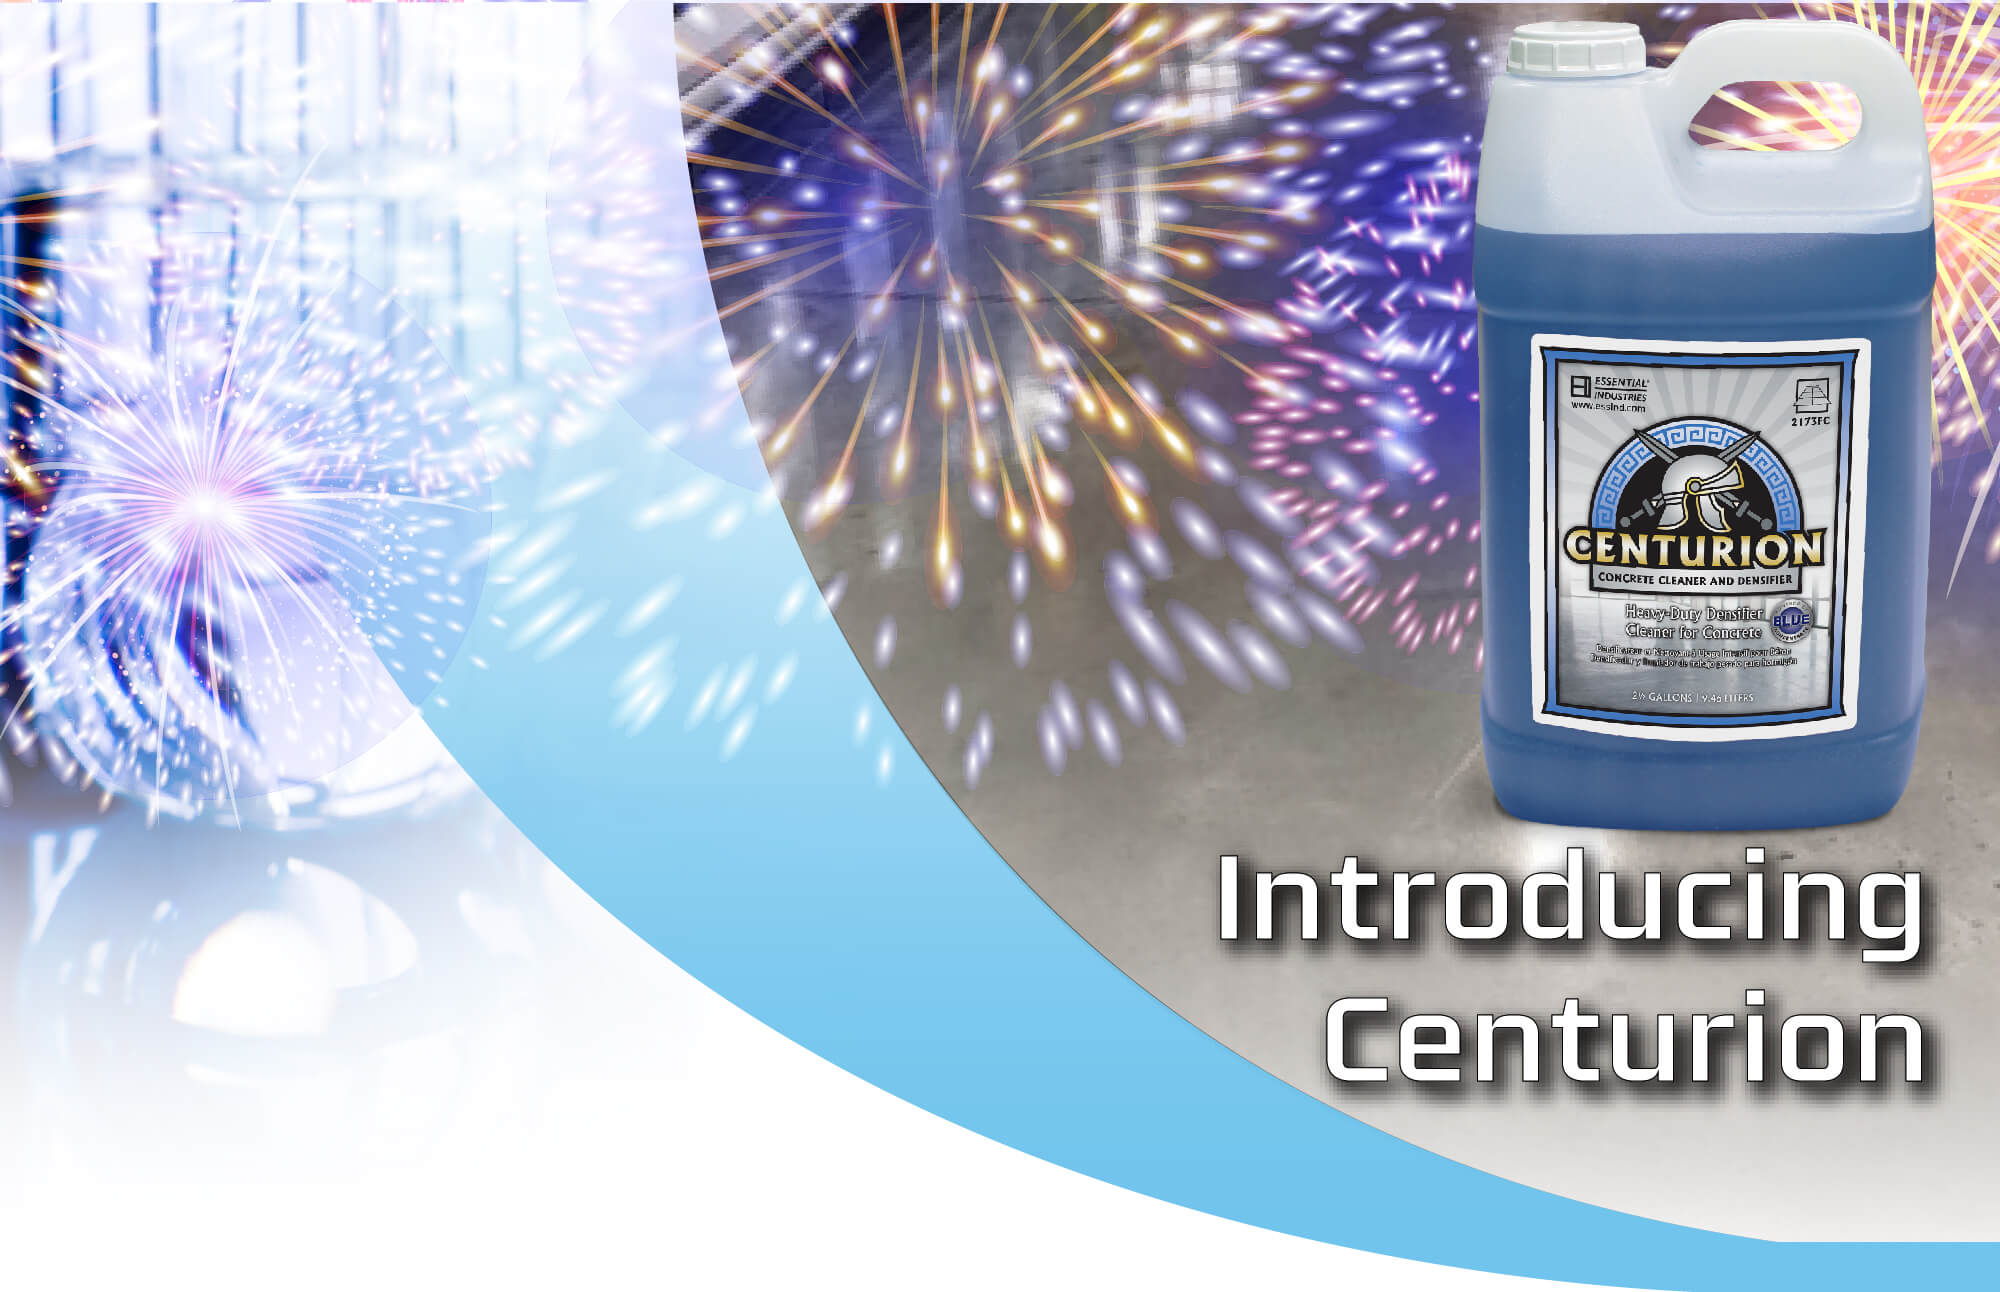 Introducing Centurion Concrete Cleaner and Densifier